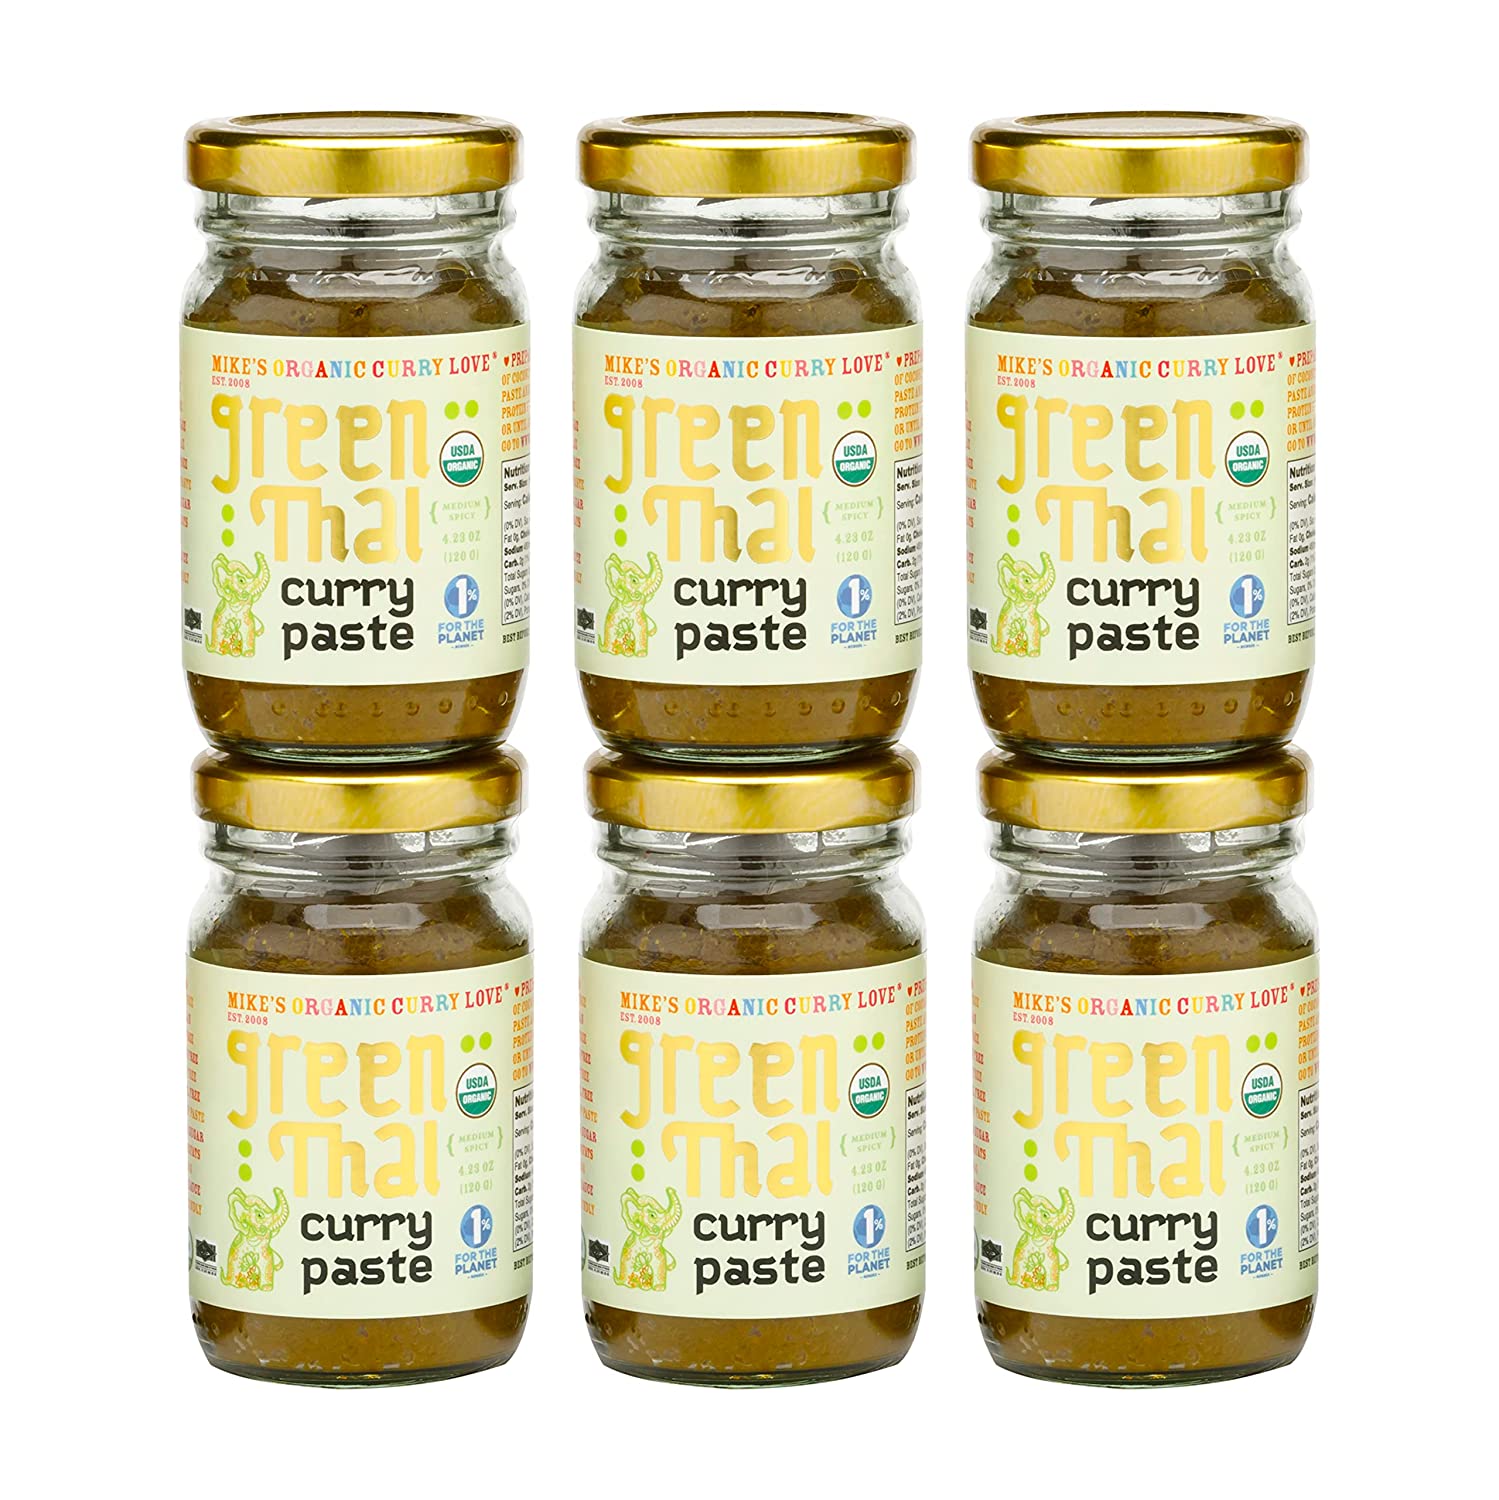 Green Thai Curry Paste - Case of 6 x 4.23 oz Glass Jars